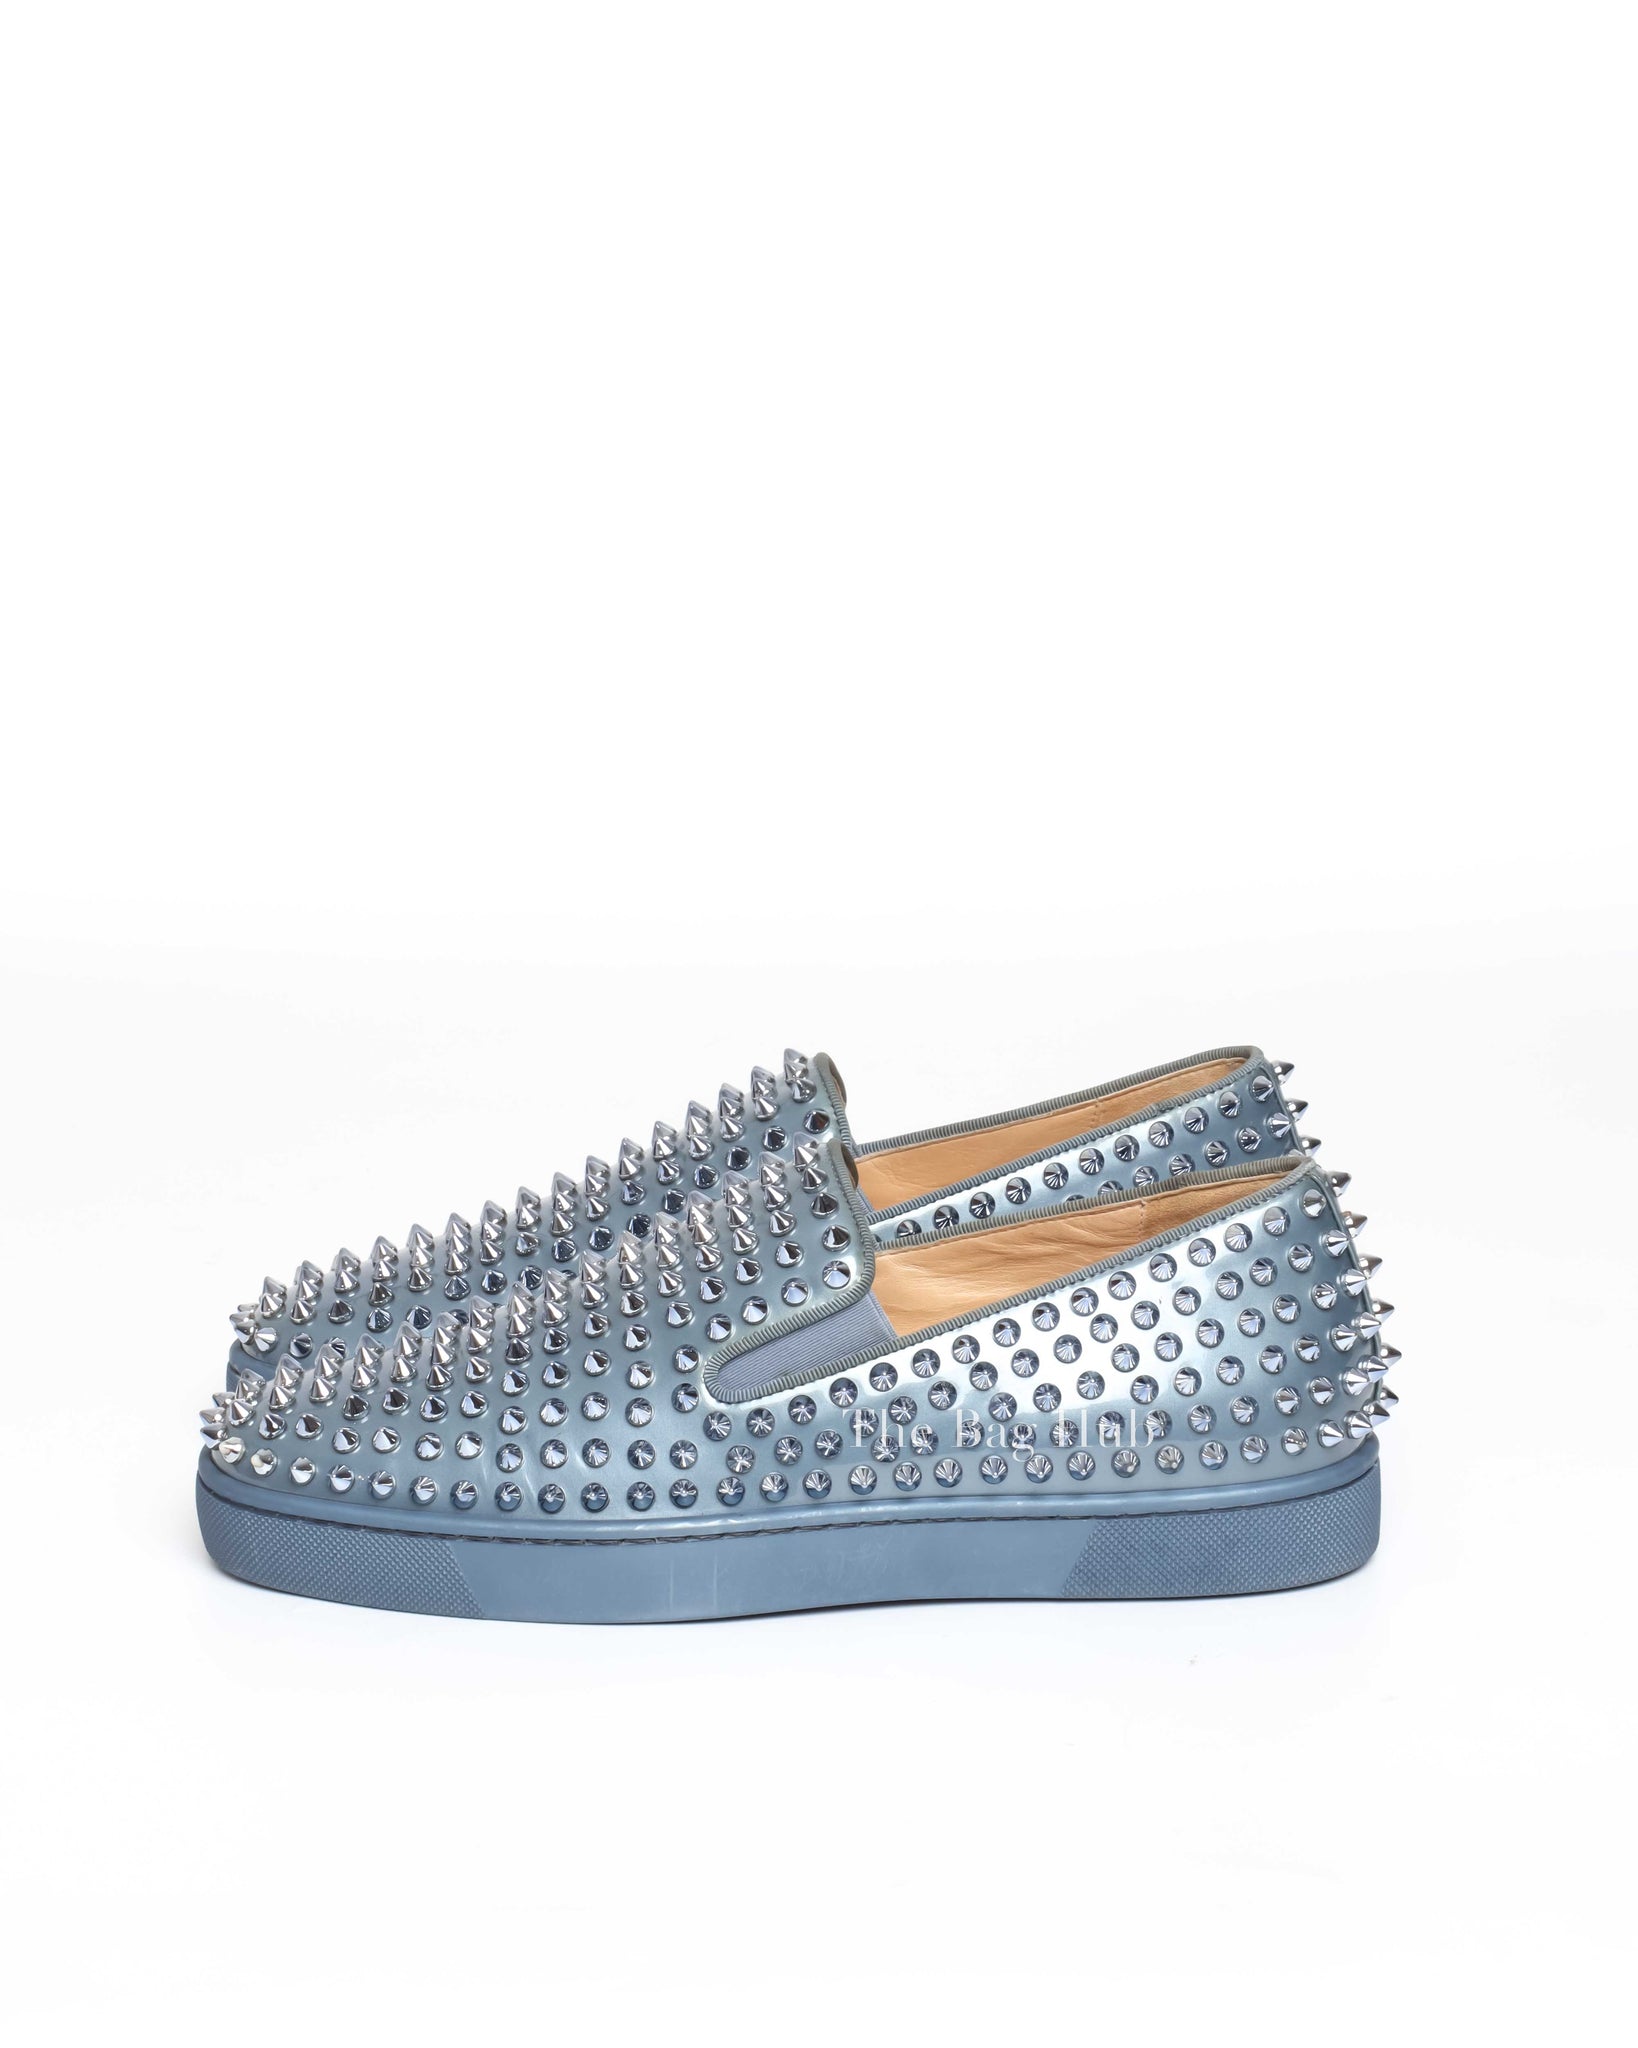 Christian Louboutin Bluish Silver Patent Roller Boat Spike Slip-On Sneakers Size 40-5